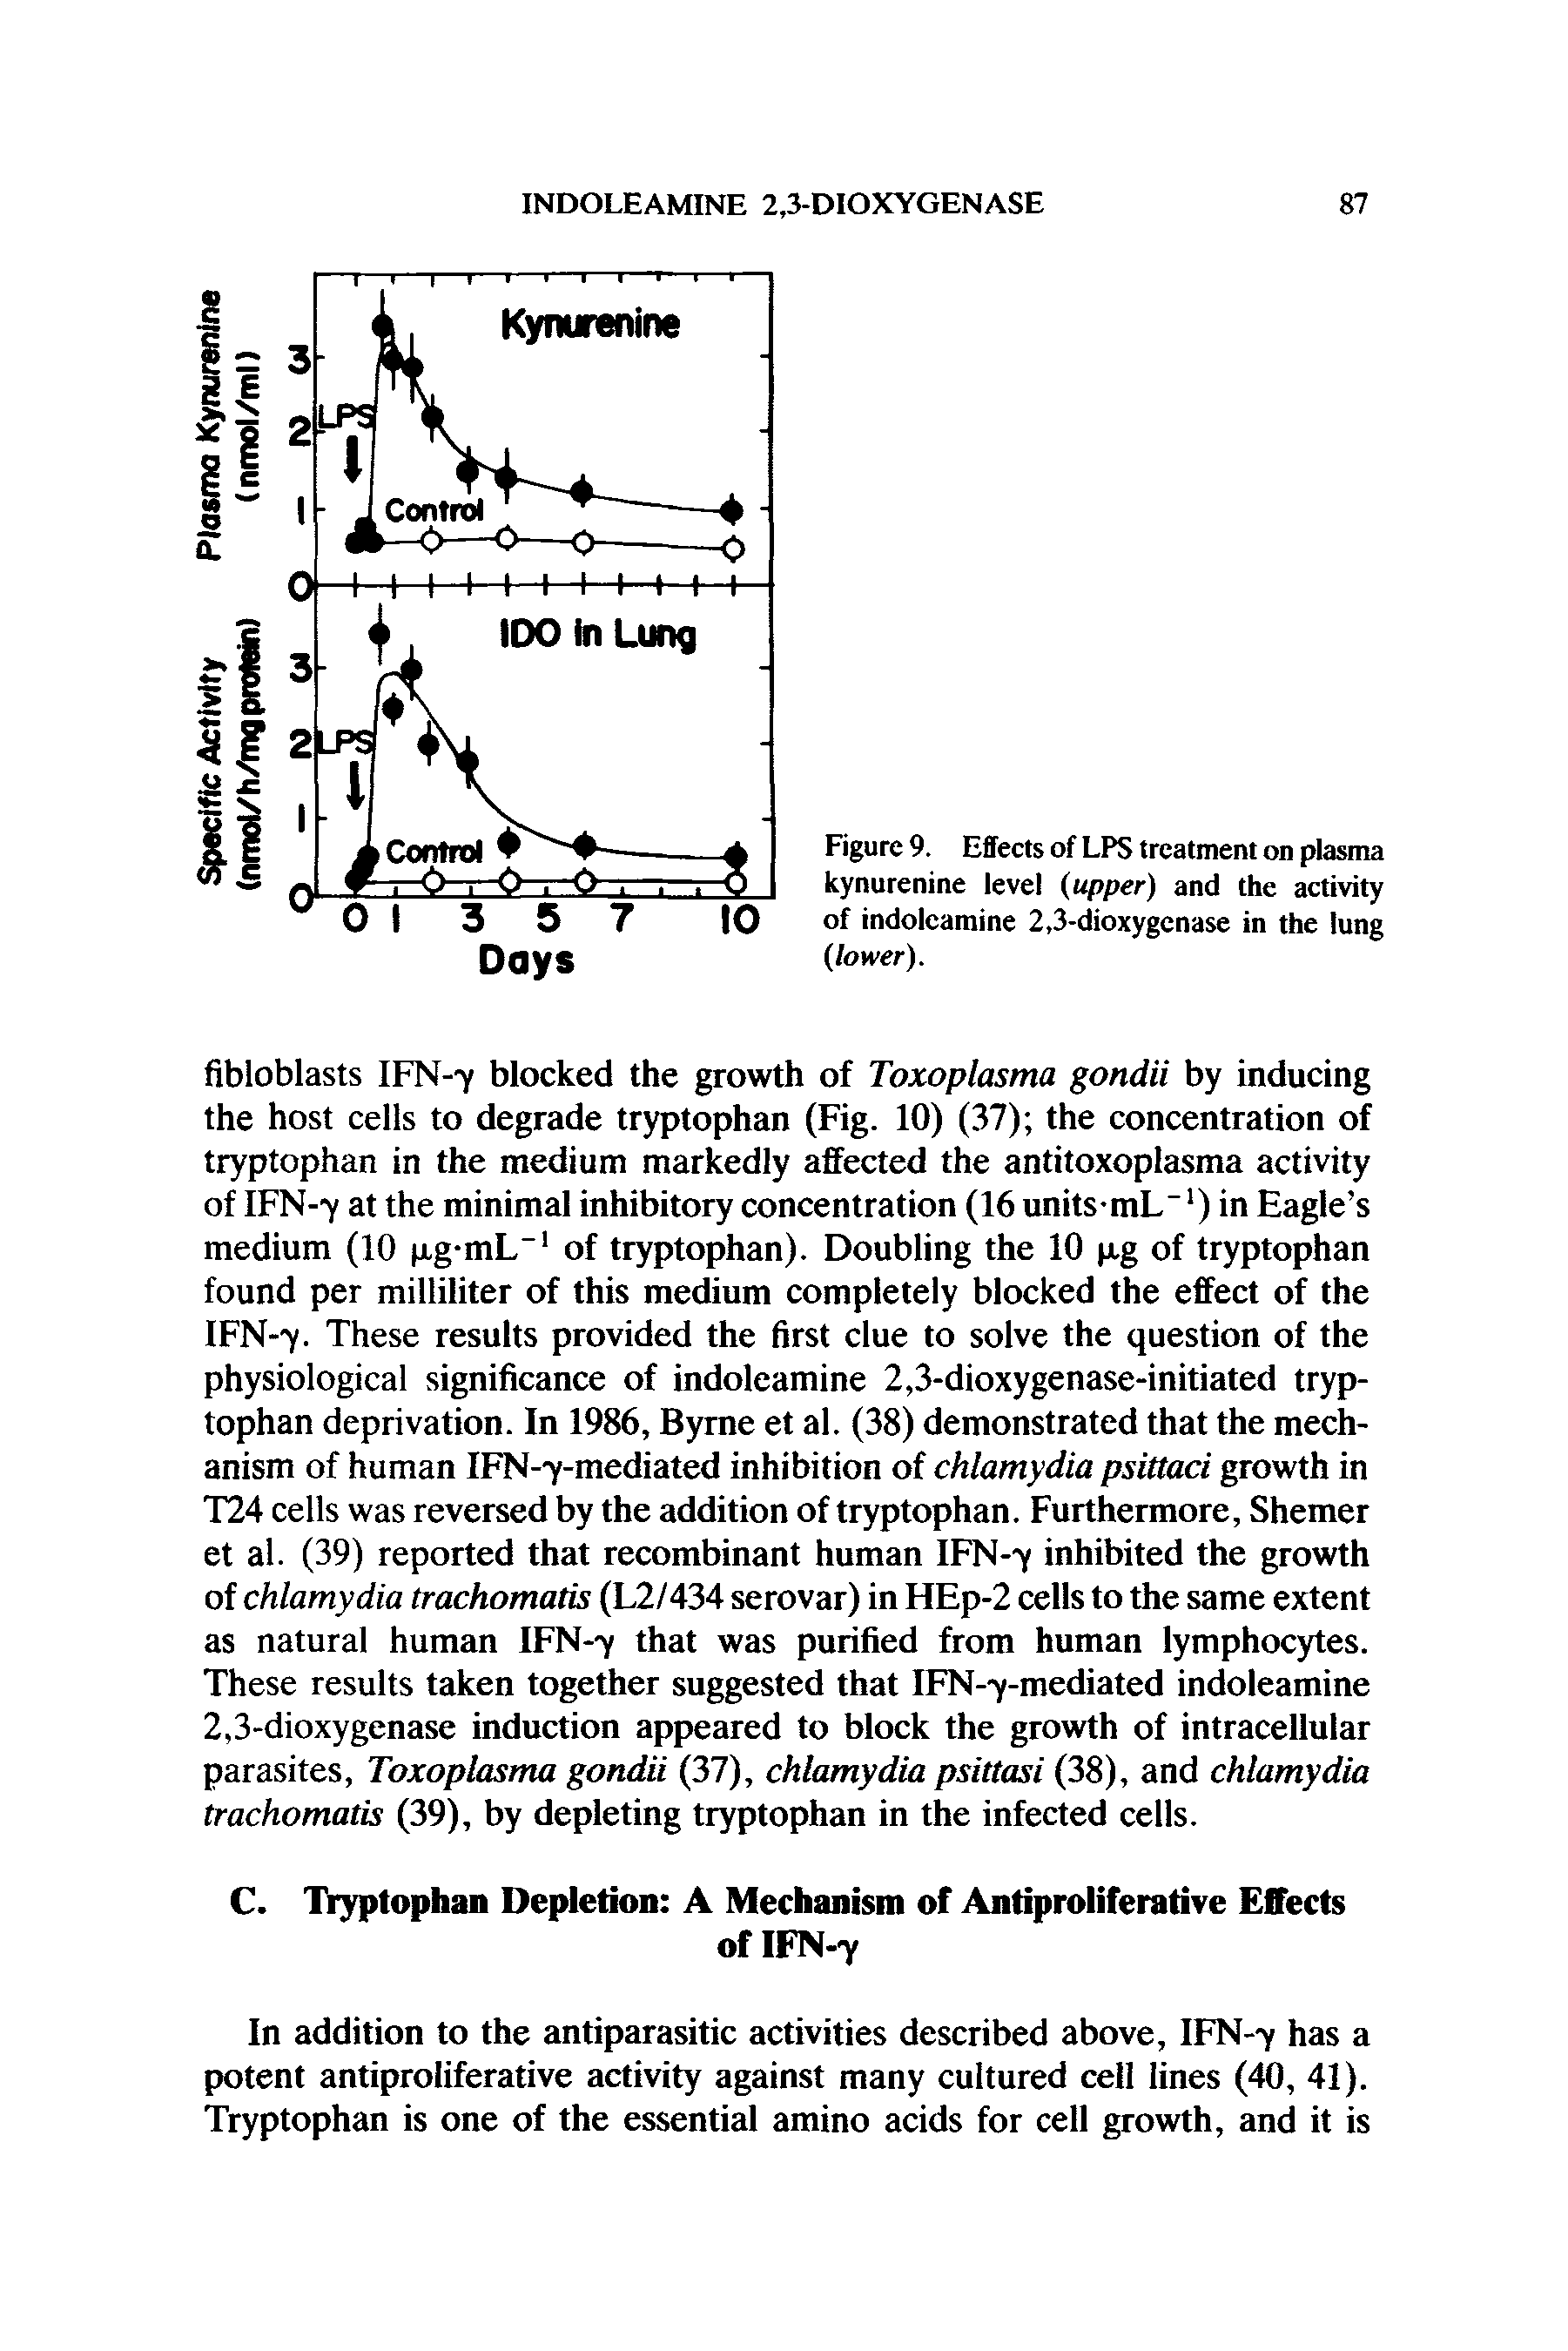 Figure 9. Effects of LPS treatment on plasma kynurenine level (upper) and the activity of indolcamine 2,3-dioxygcnase in the lung (lower).